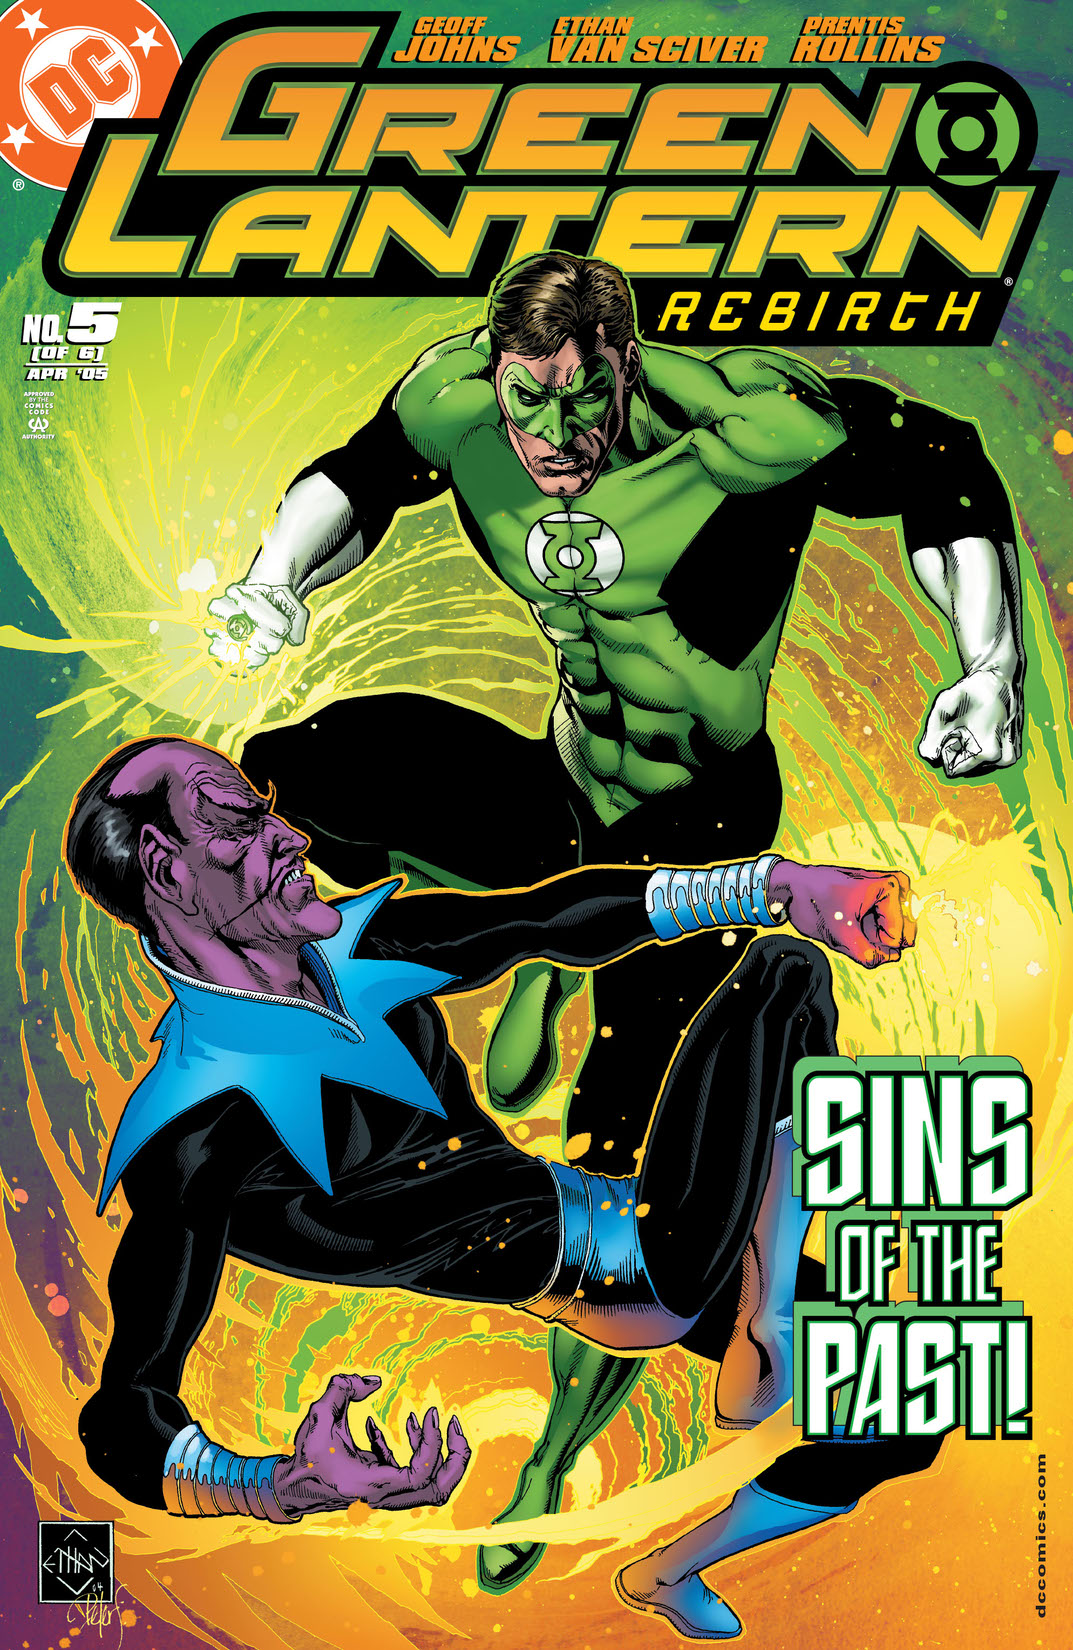 Green Lantern: Rebirth #5 preview images